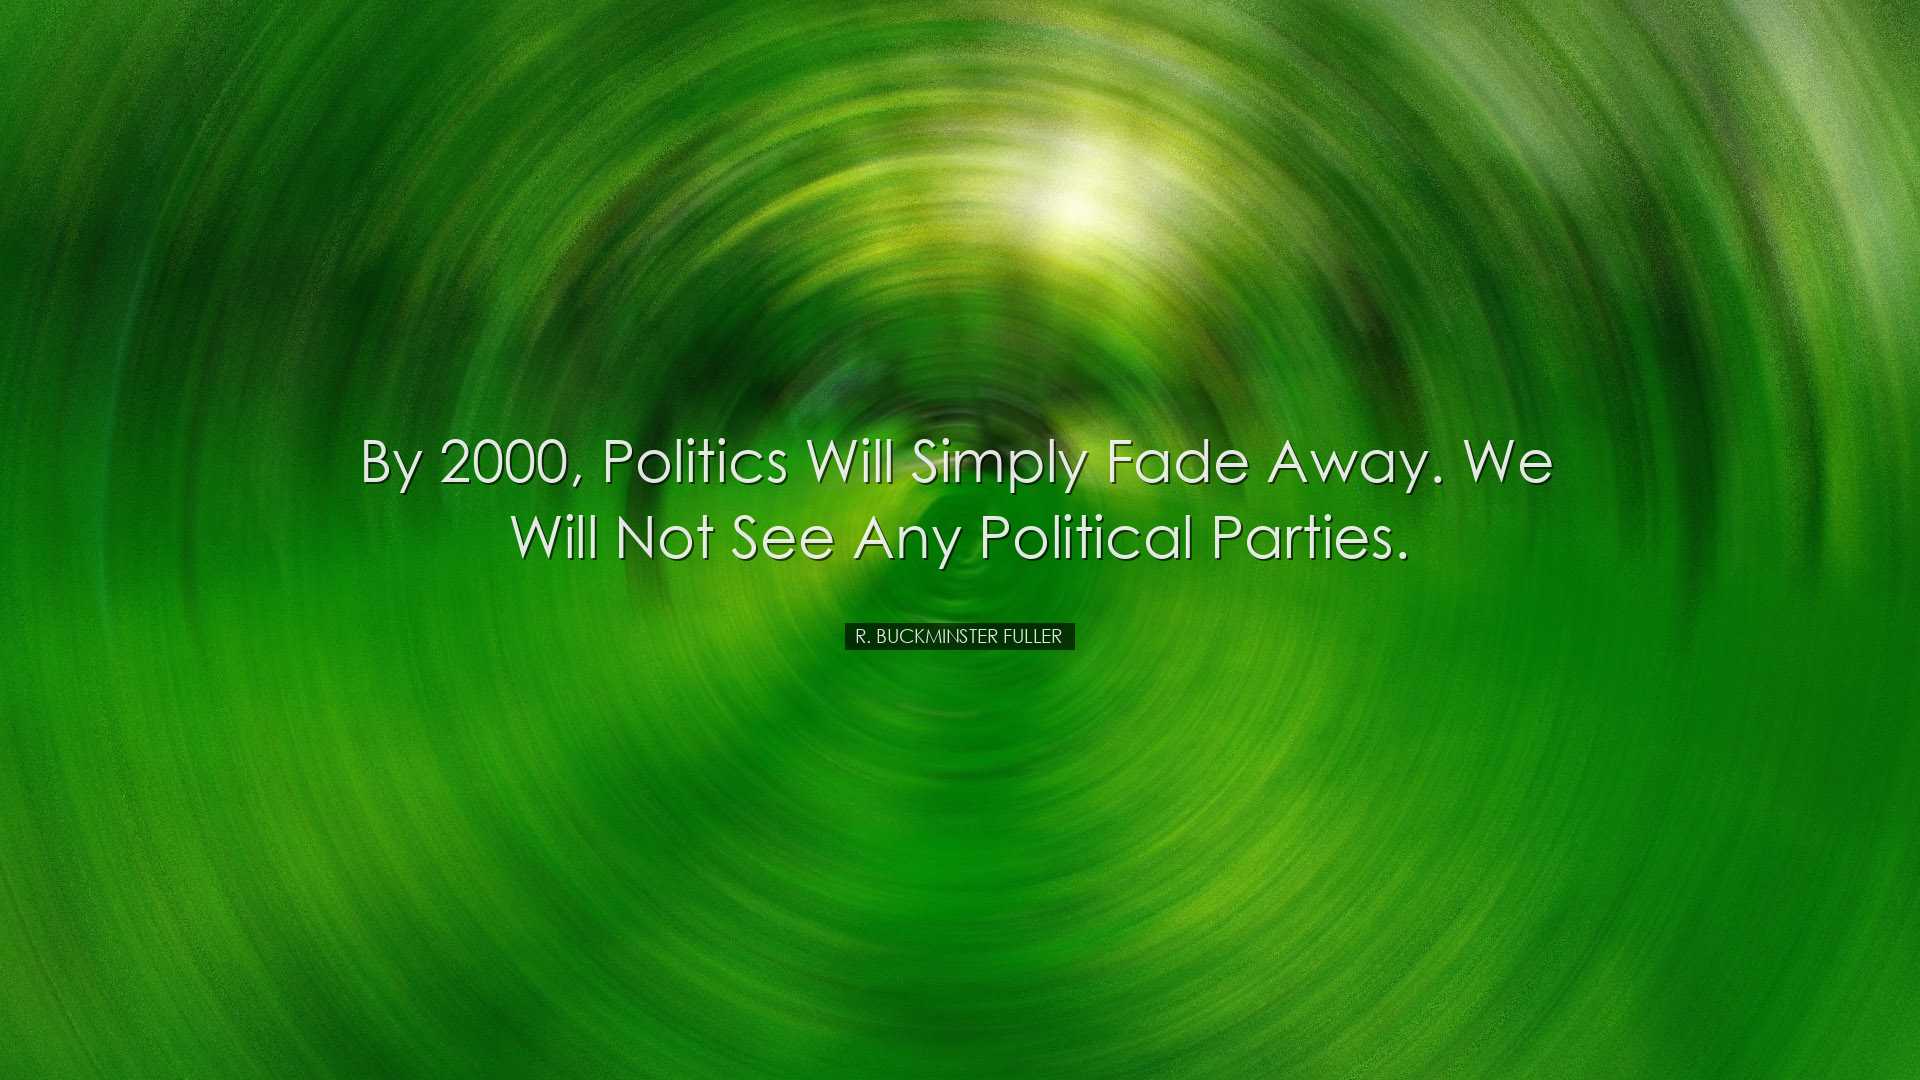 By 2000, politics will simply fade away. We will not see any polit